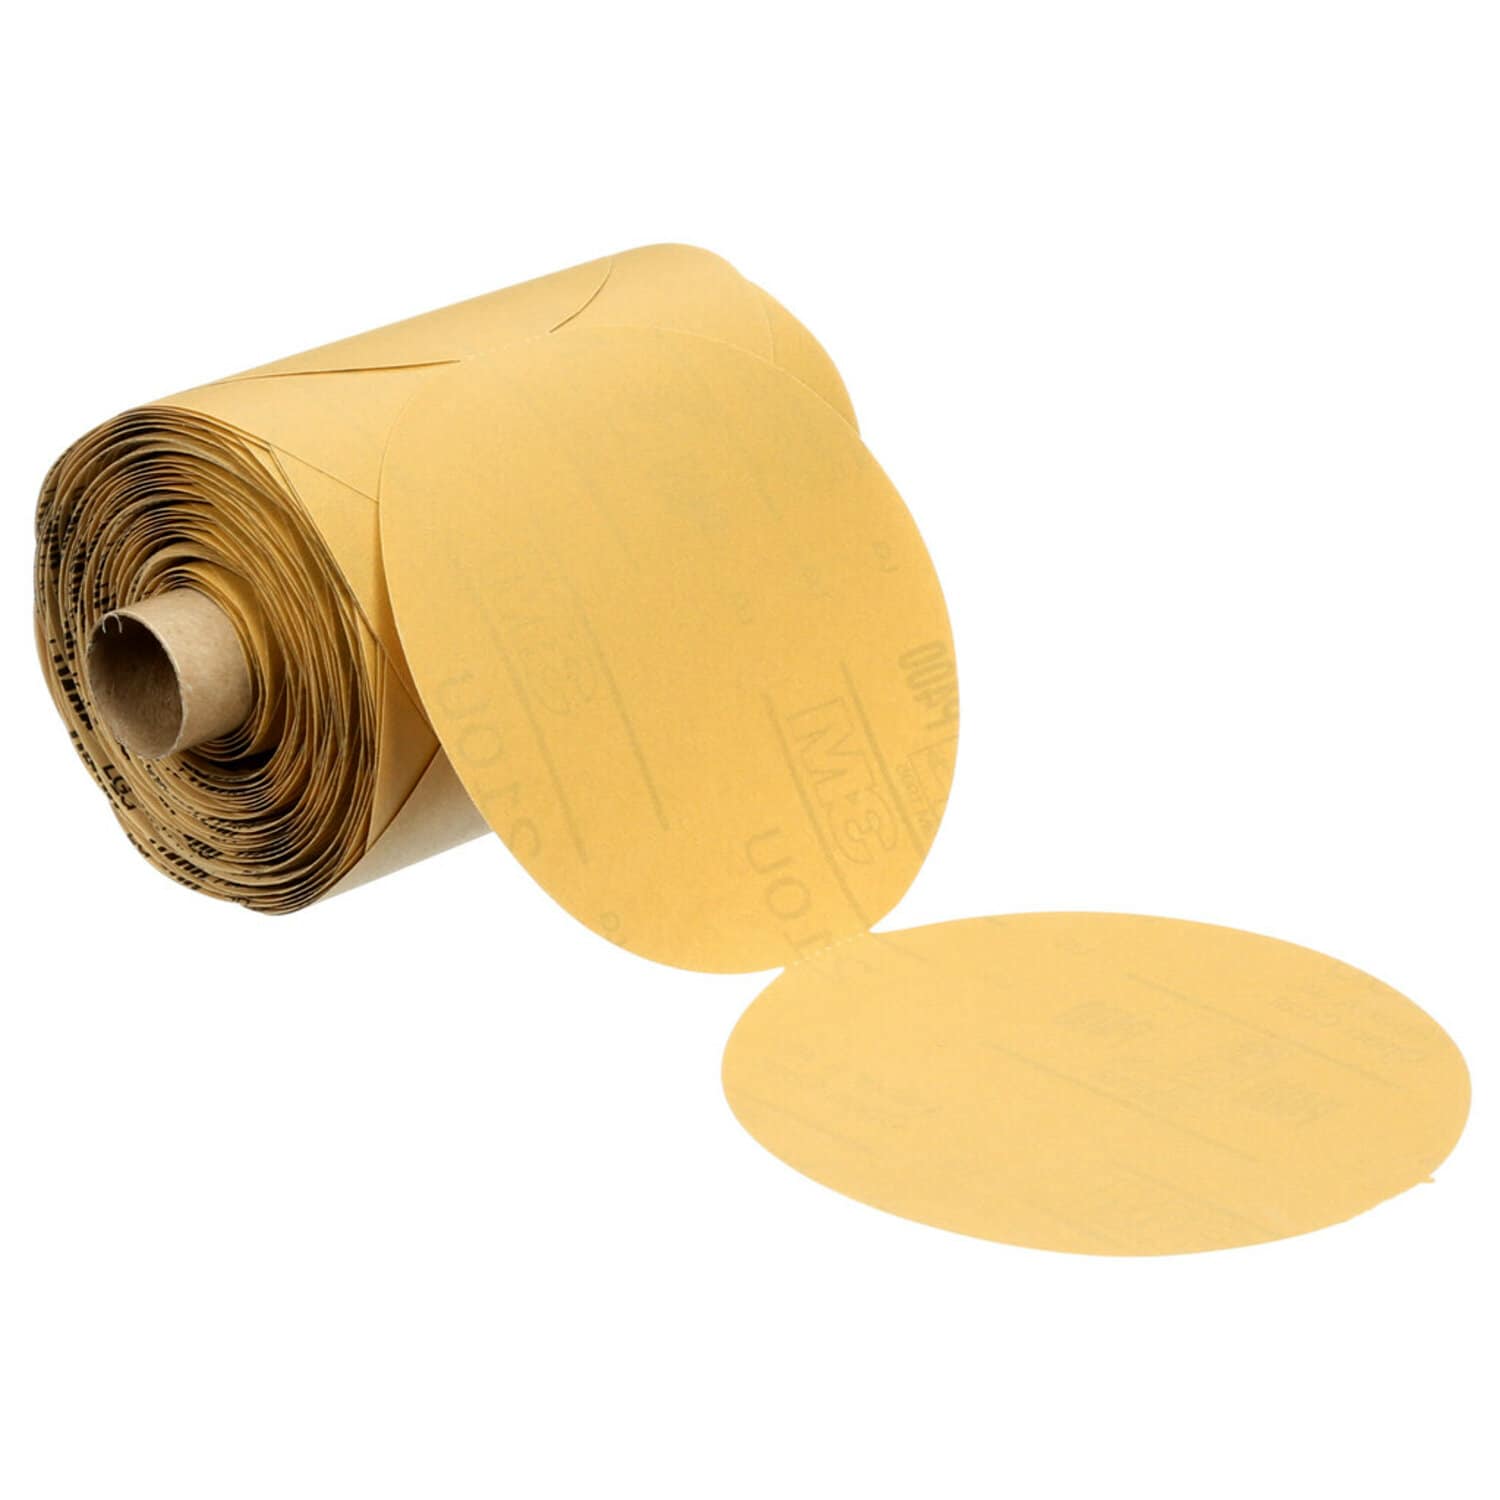 7100069979 - 3M Stikit Paper Disc Roll 210U, P400 A-weight, Config